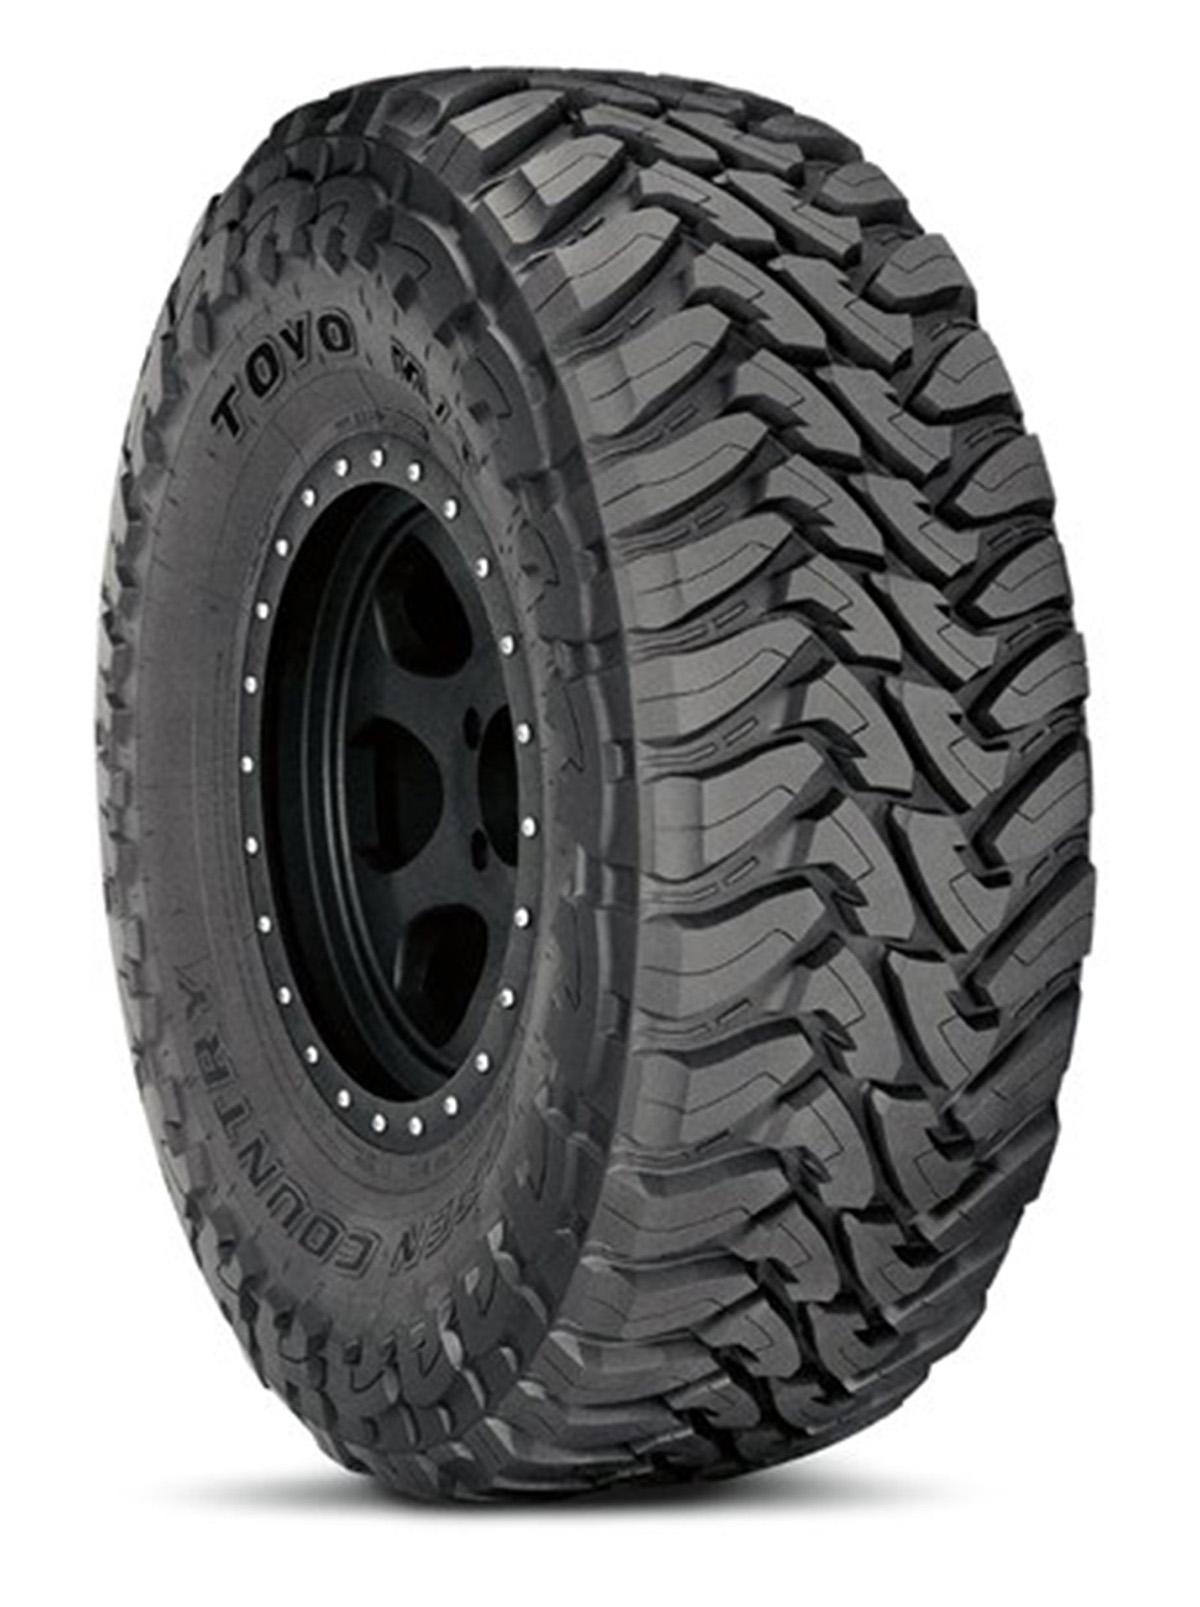 Toyo - OPEN COUNTRY MT  NW  250/25R17